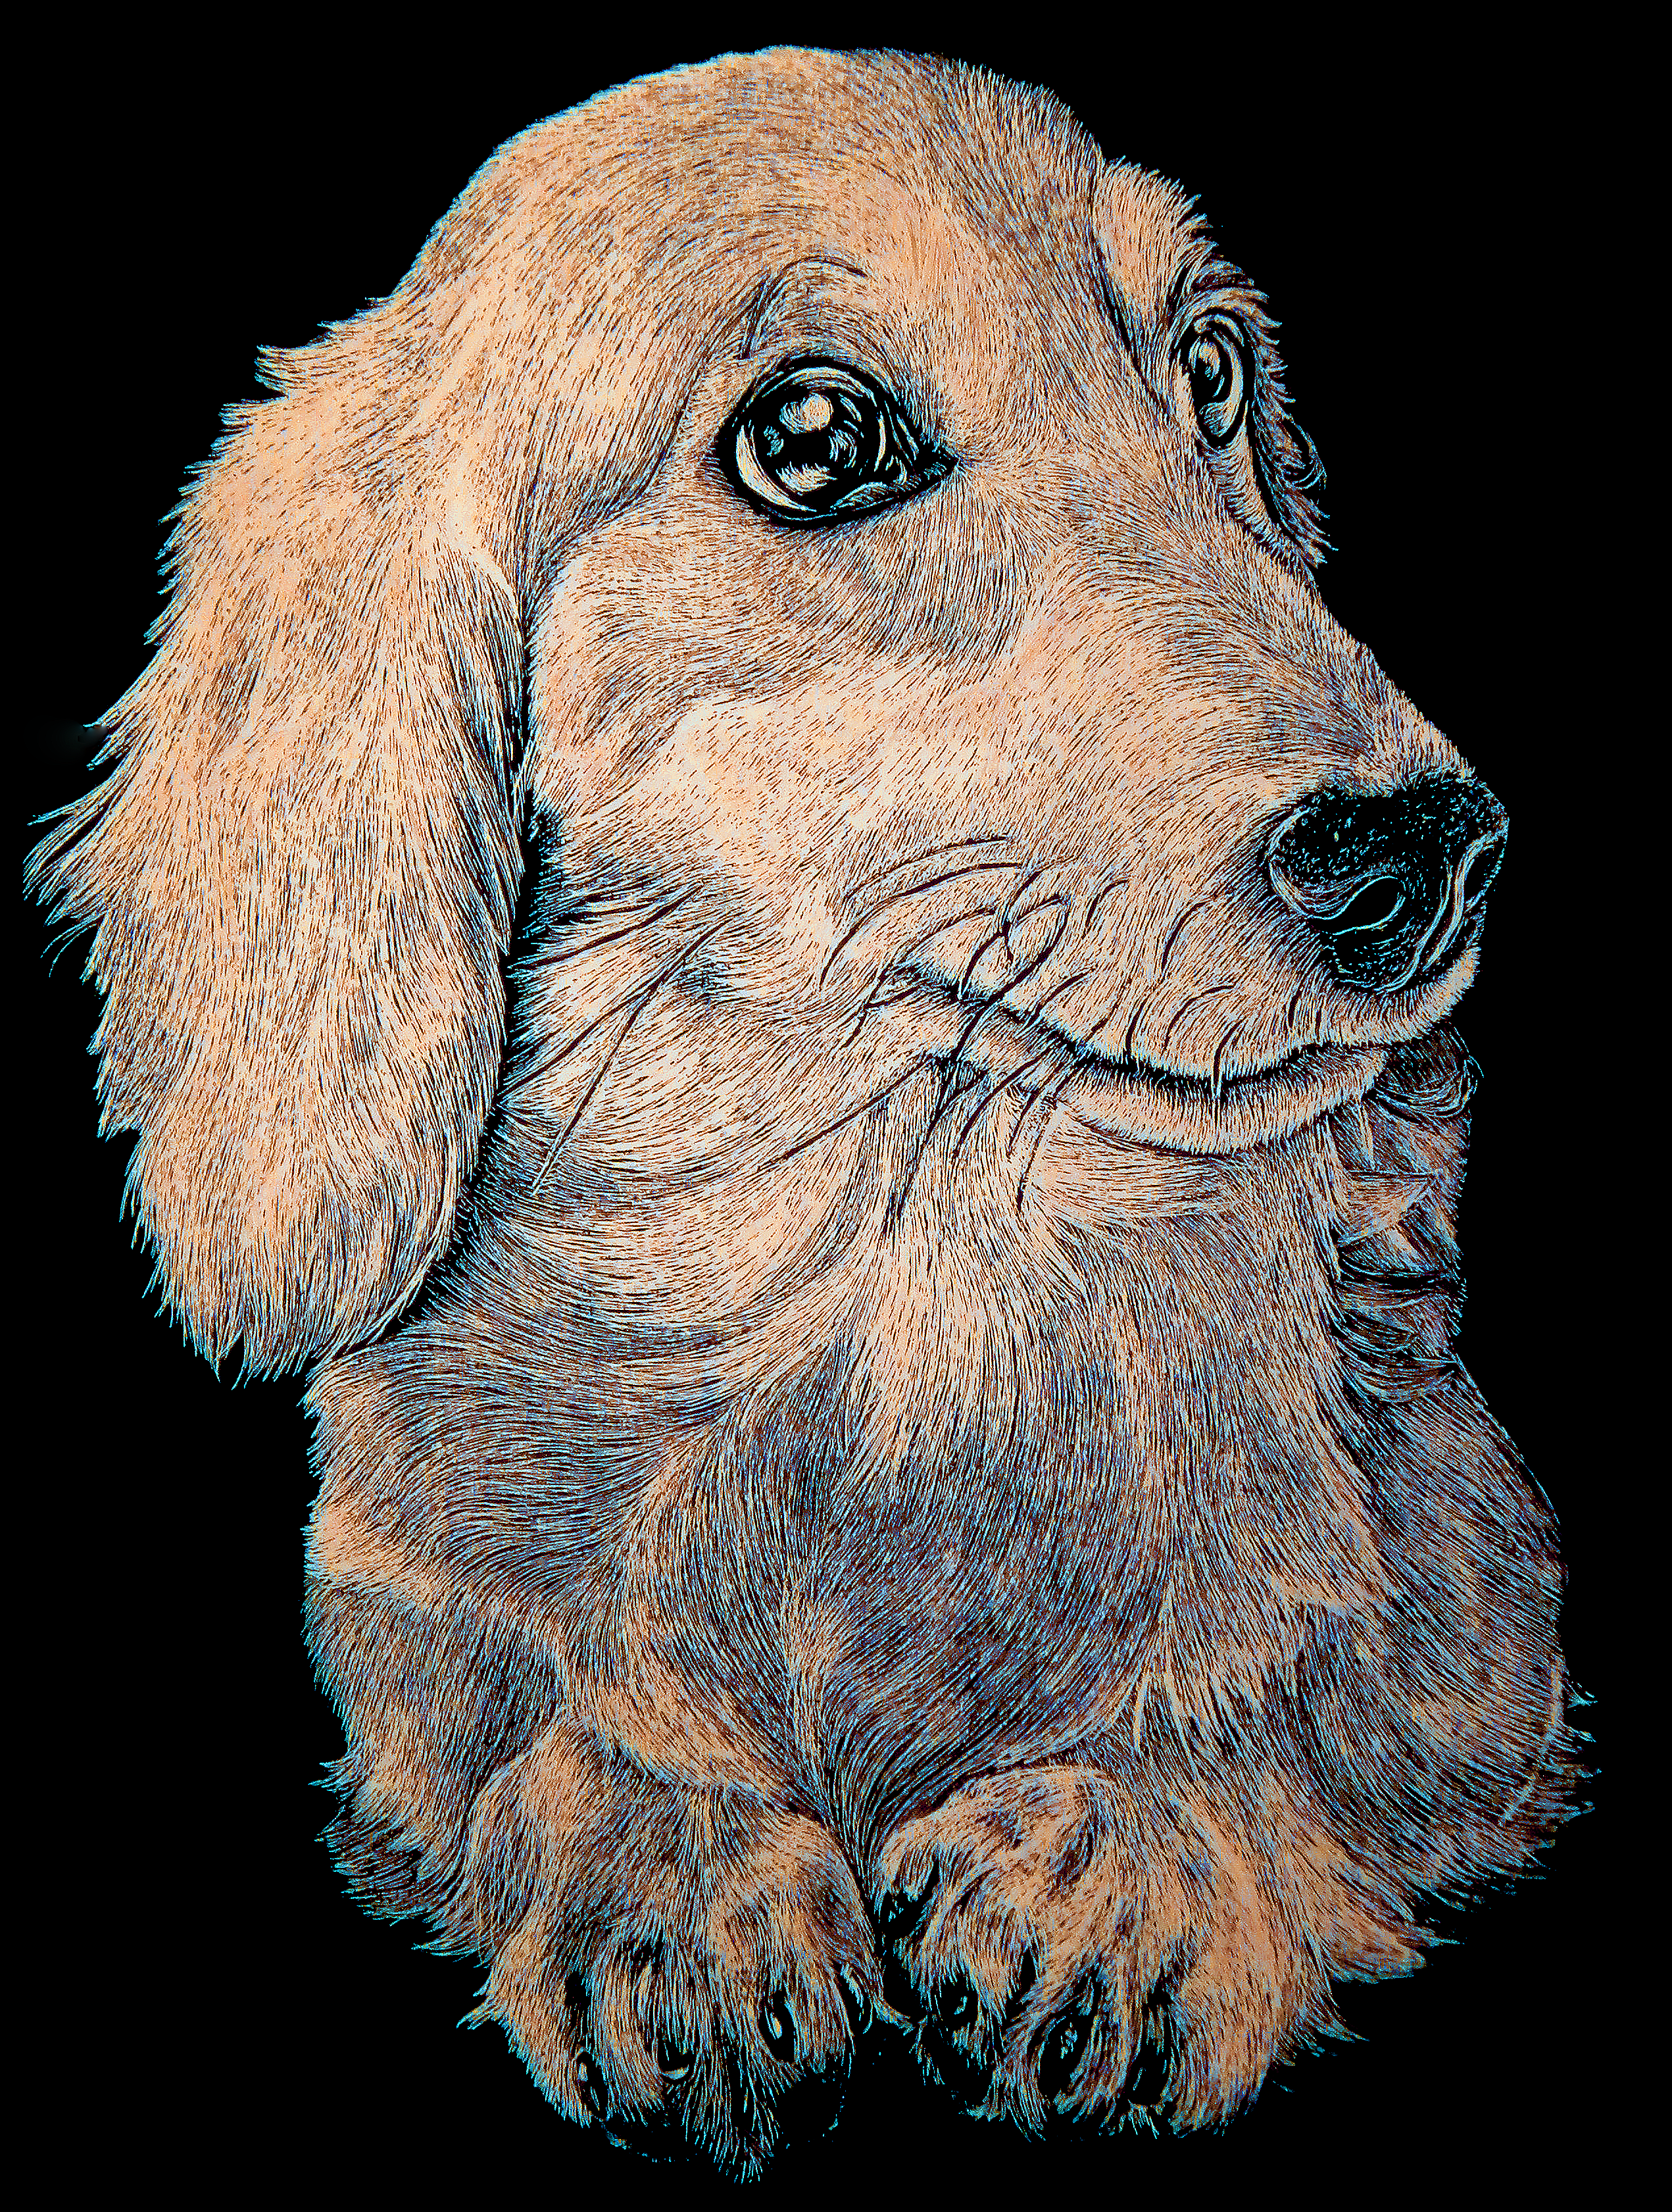 A scratchboard etching of a dachshund pup.